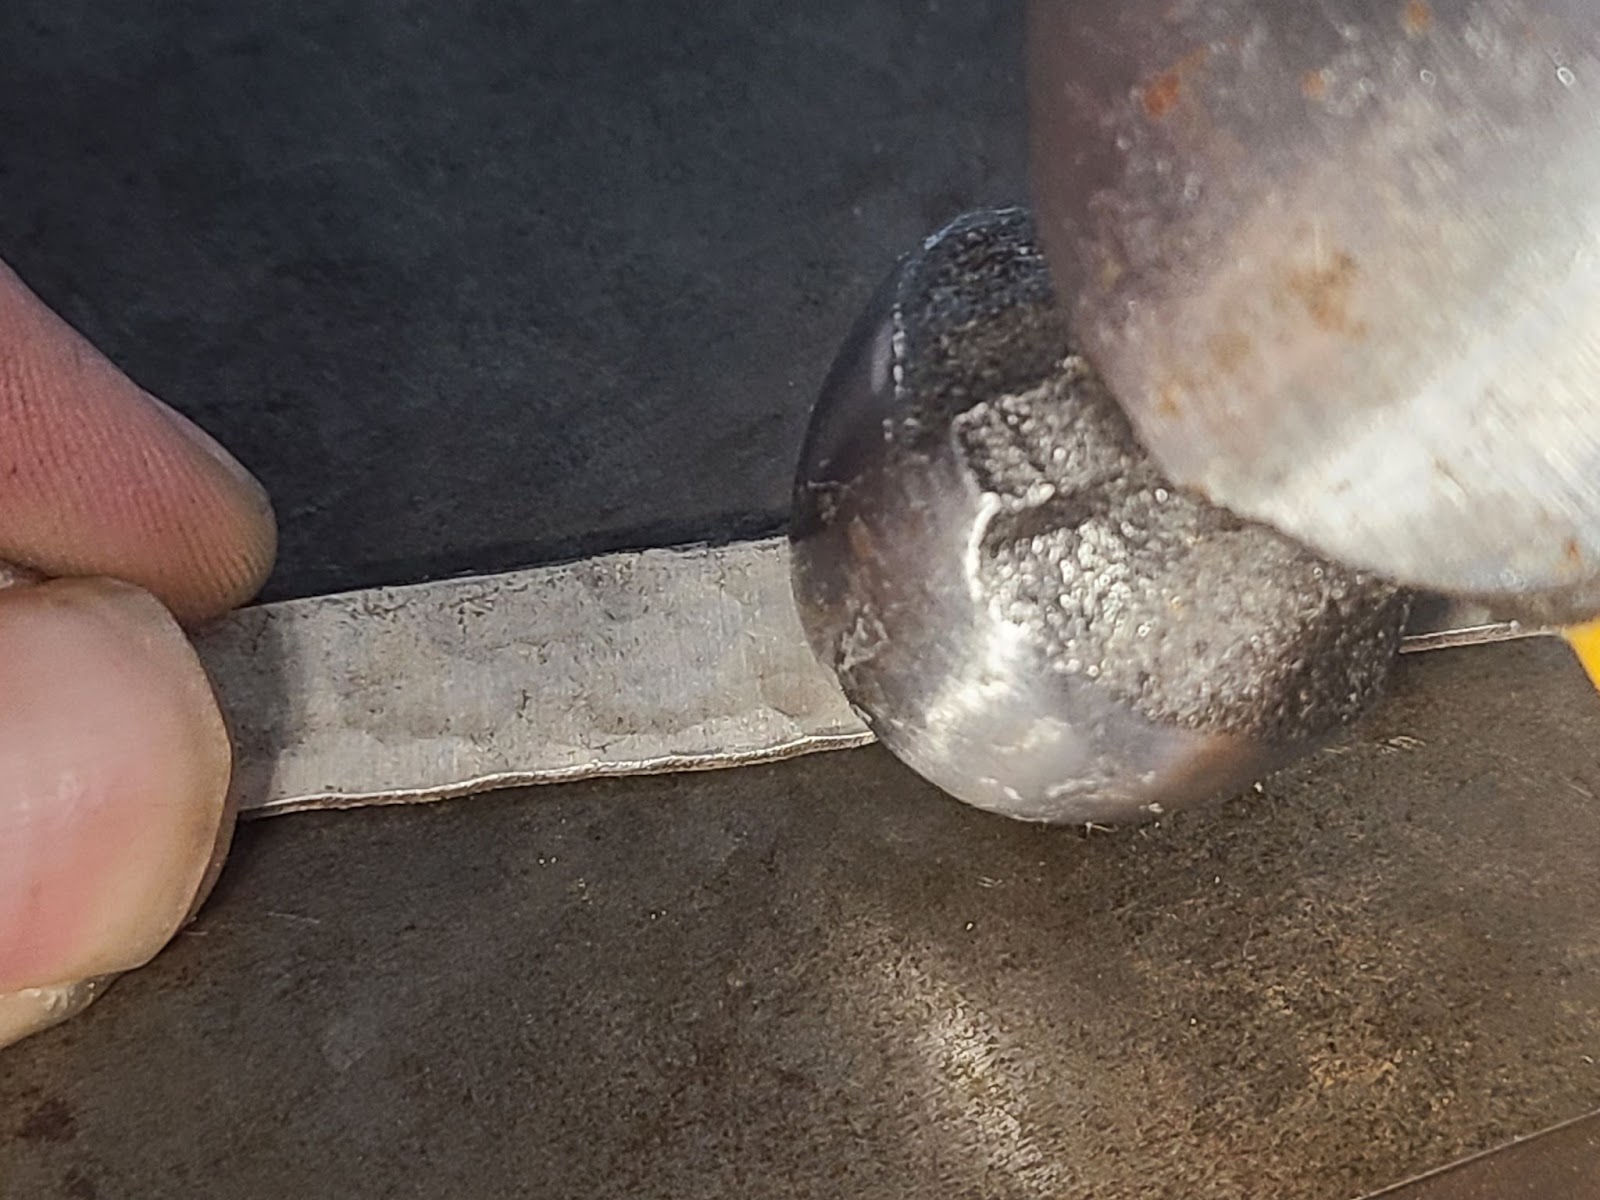 texturing ring after hammering it